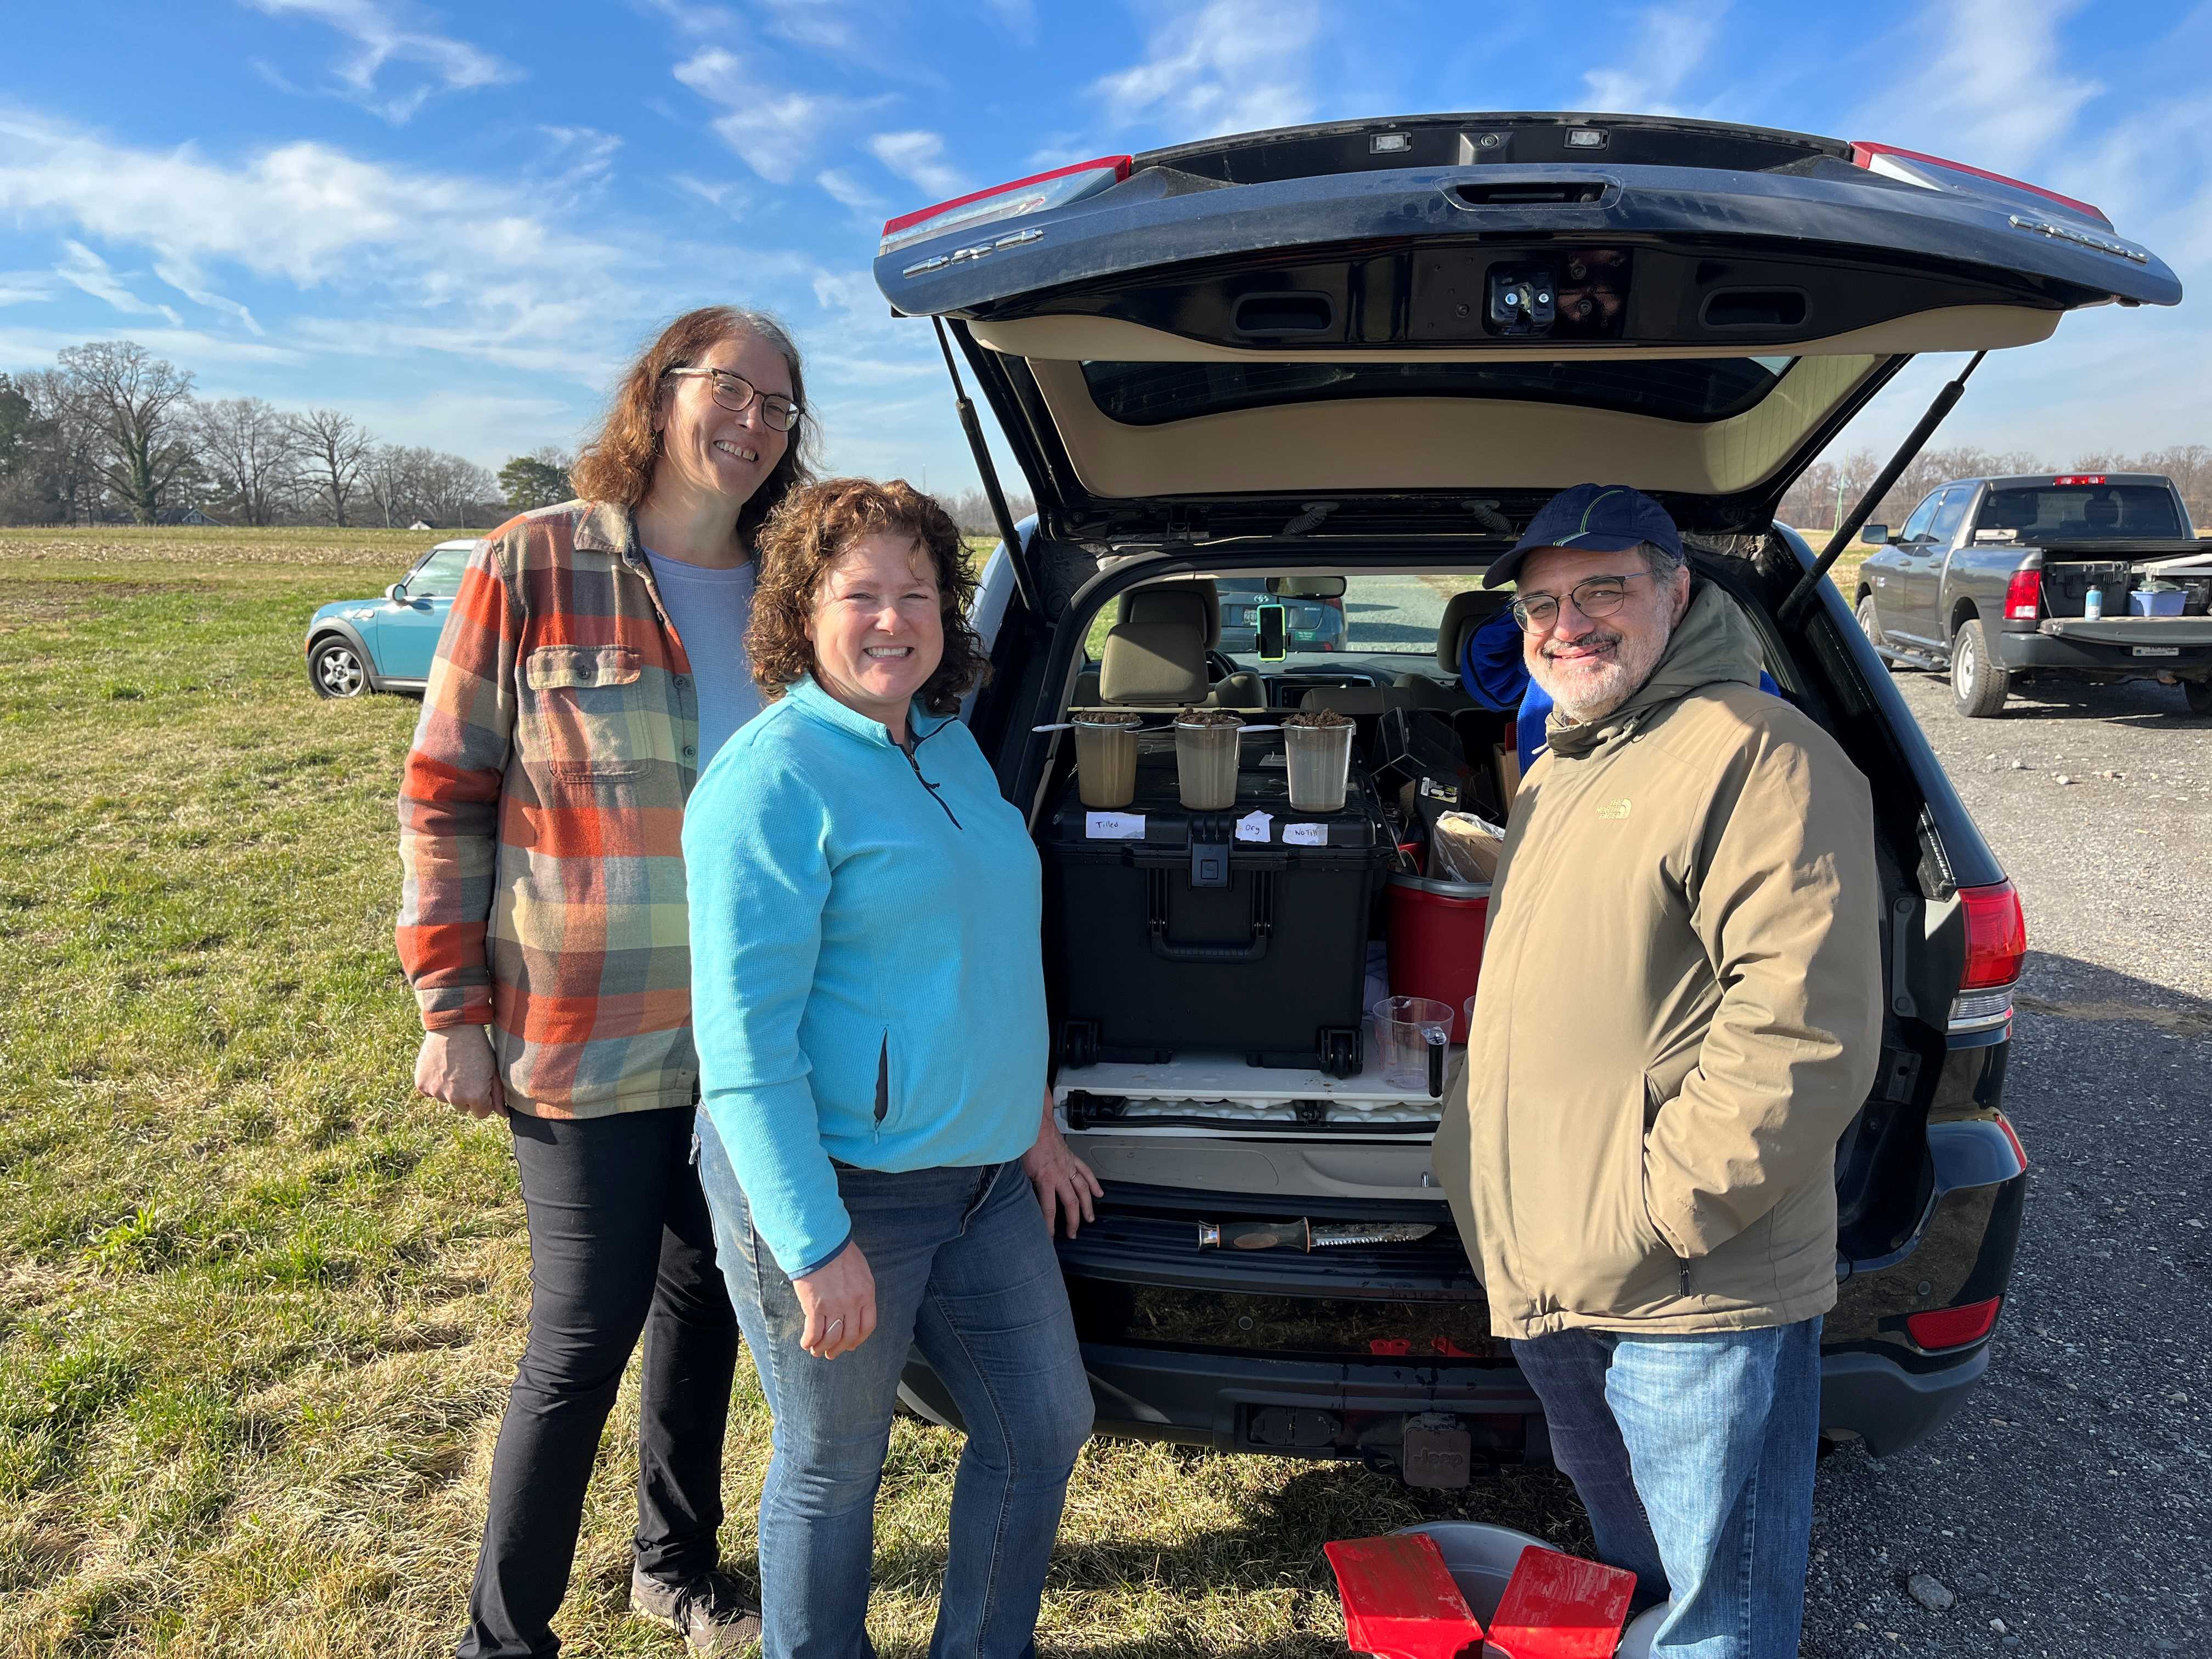 USDA Northeast Climate Hub collaborating partners Dr. Kate White (ARS), Elizabeth Marks (NRCS) and Northeast Climate Hub co-director Dr. Michel Cavigelli (ARS).  Research done by ARS can help NRCS planners support farmers with the latest information on growing systems.